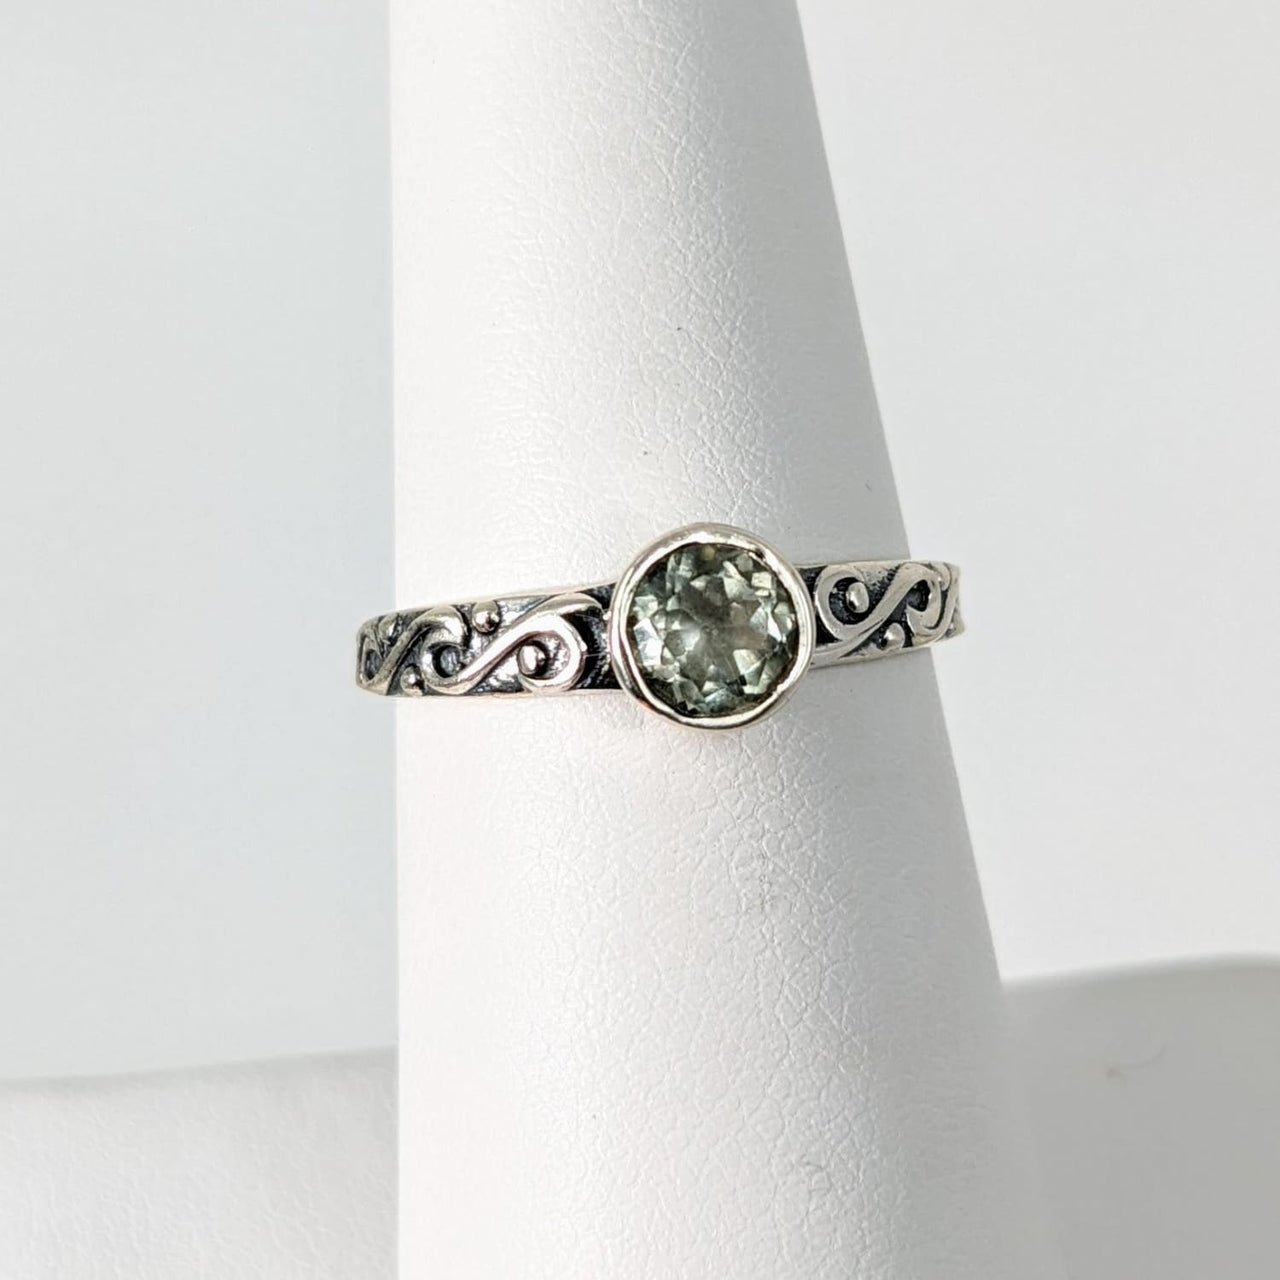 Green Amethyst Faceted Ring #SK8315 - $59